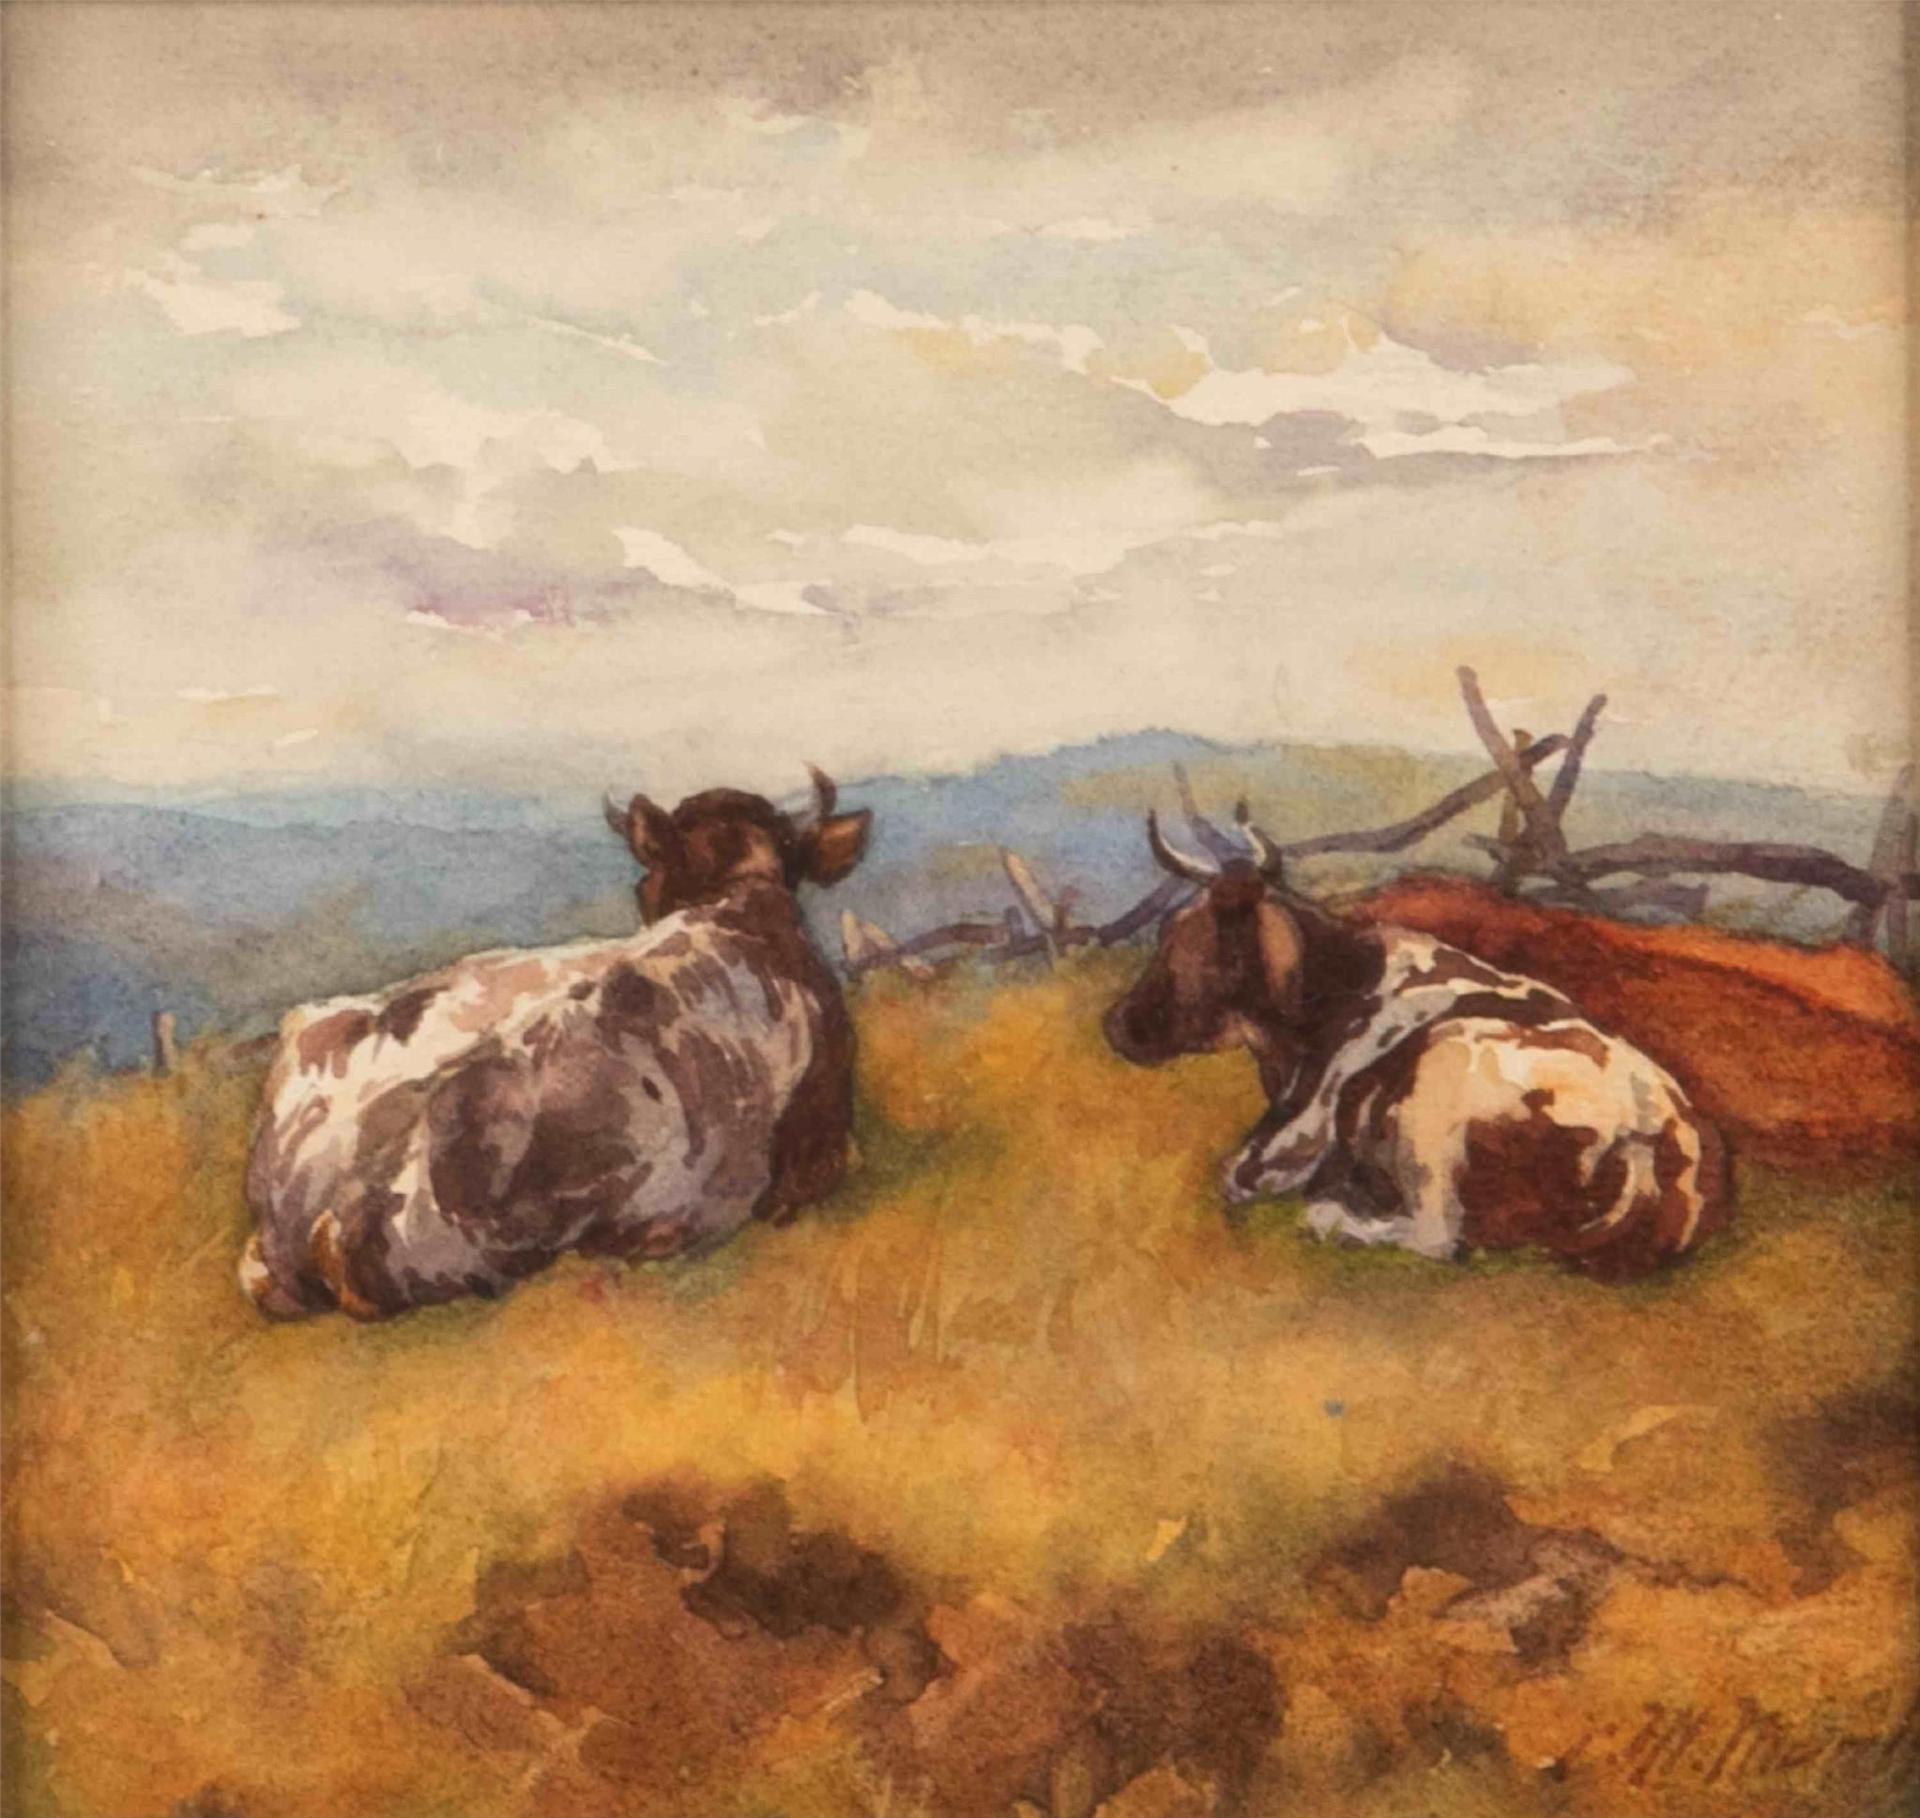 Charles MacDonald Manly (1855-1924) - Cattle at Rest